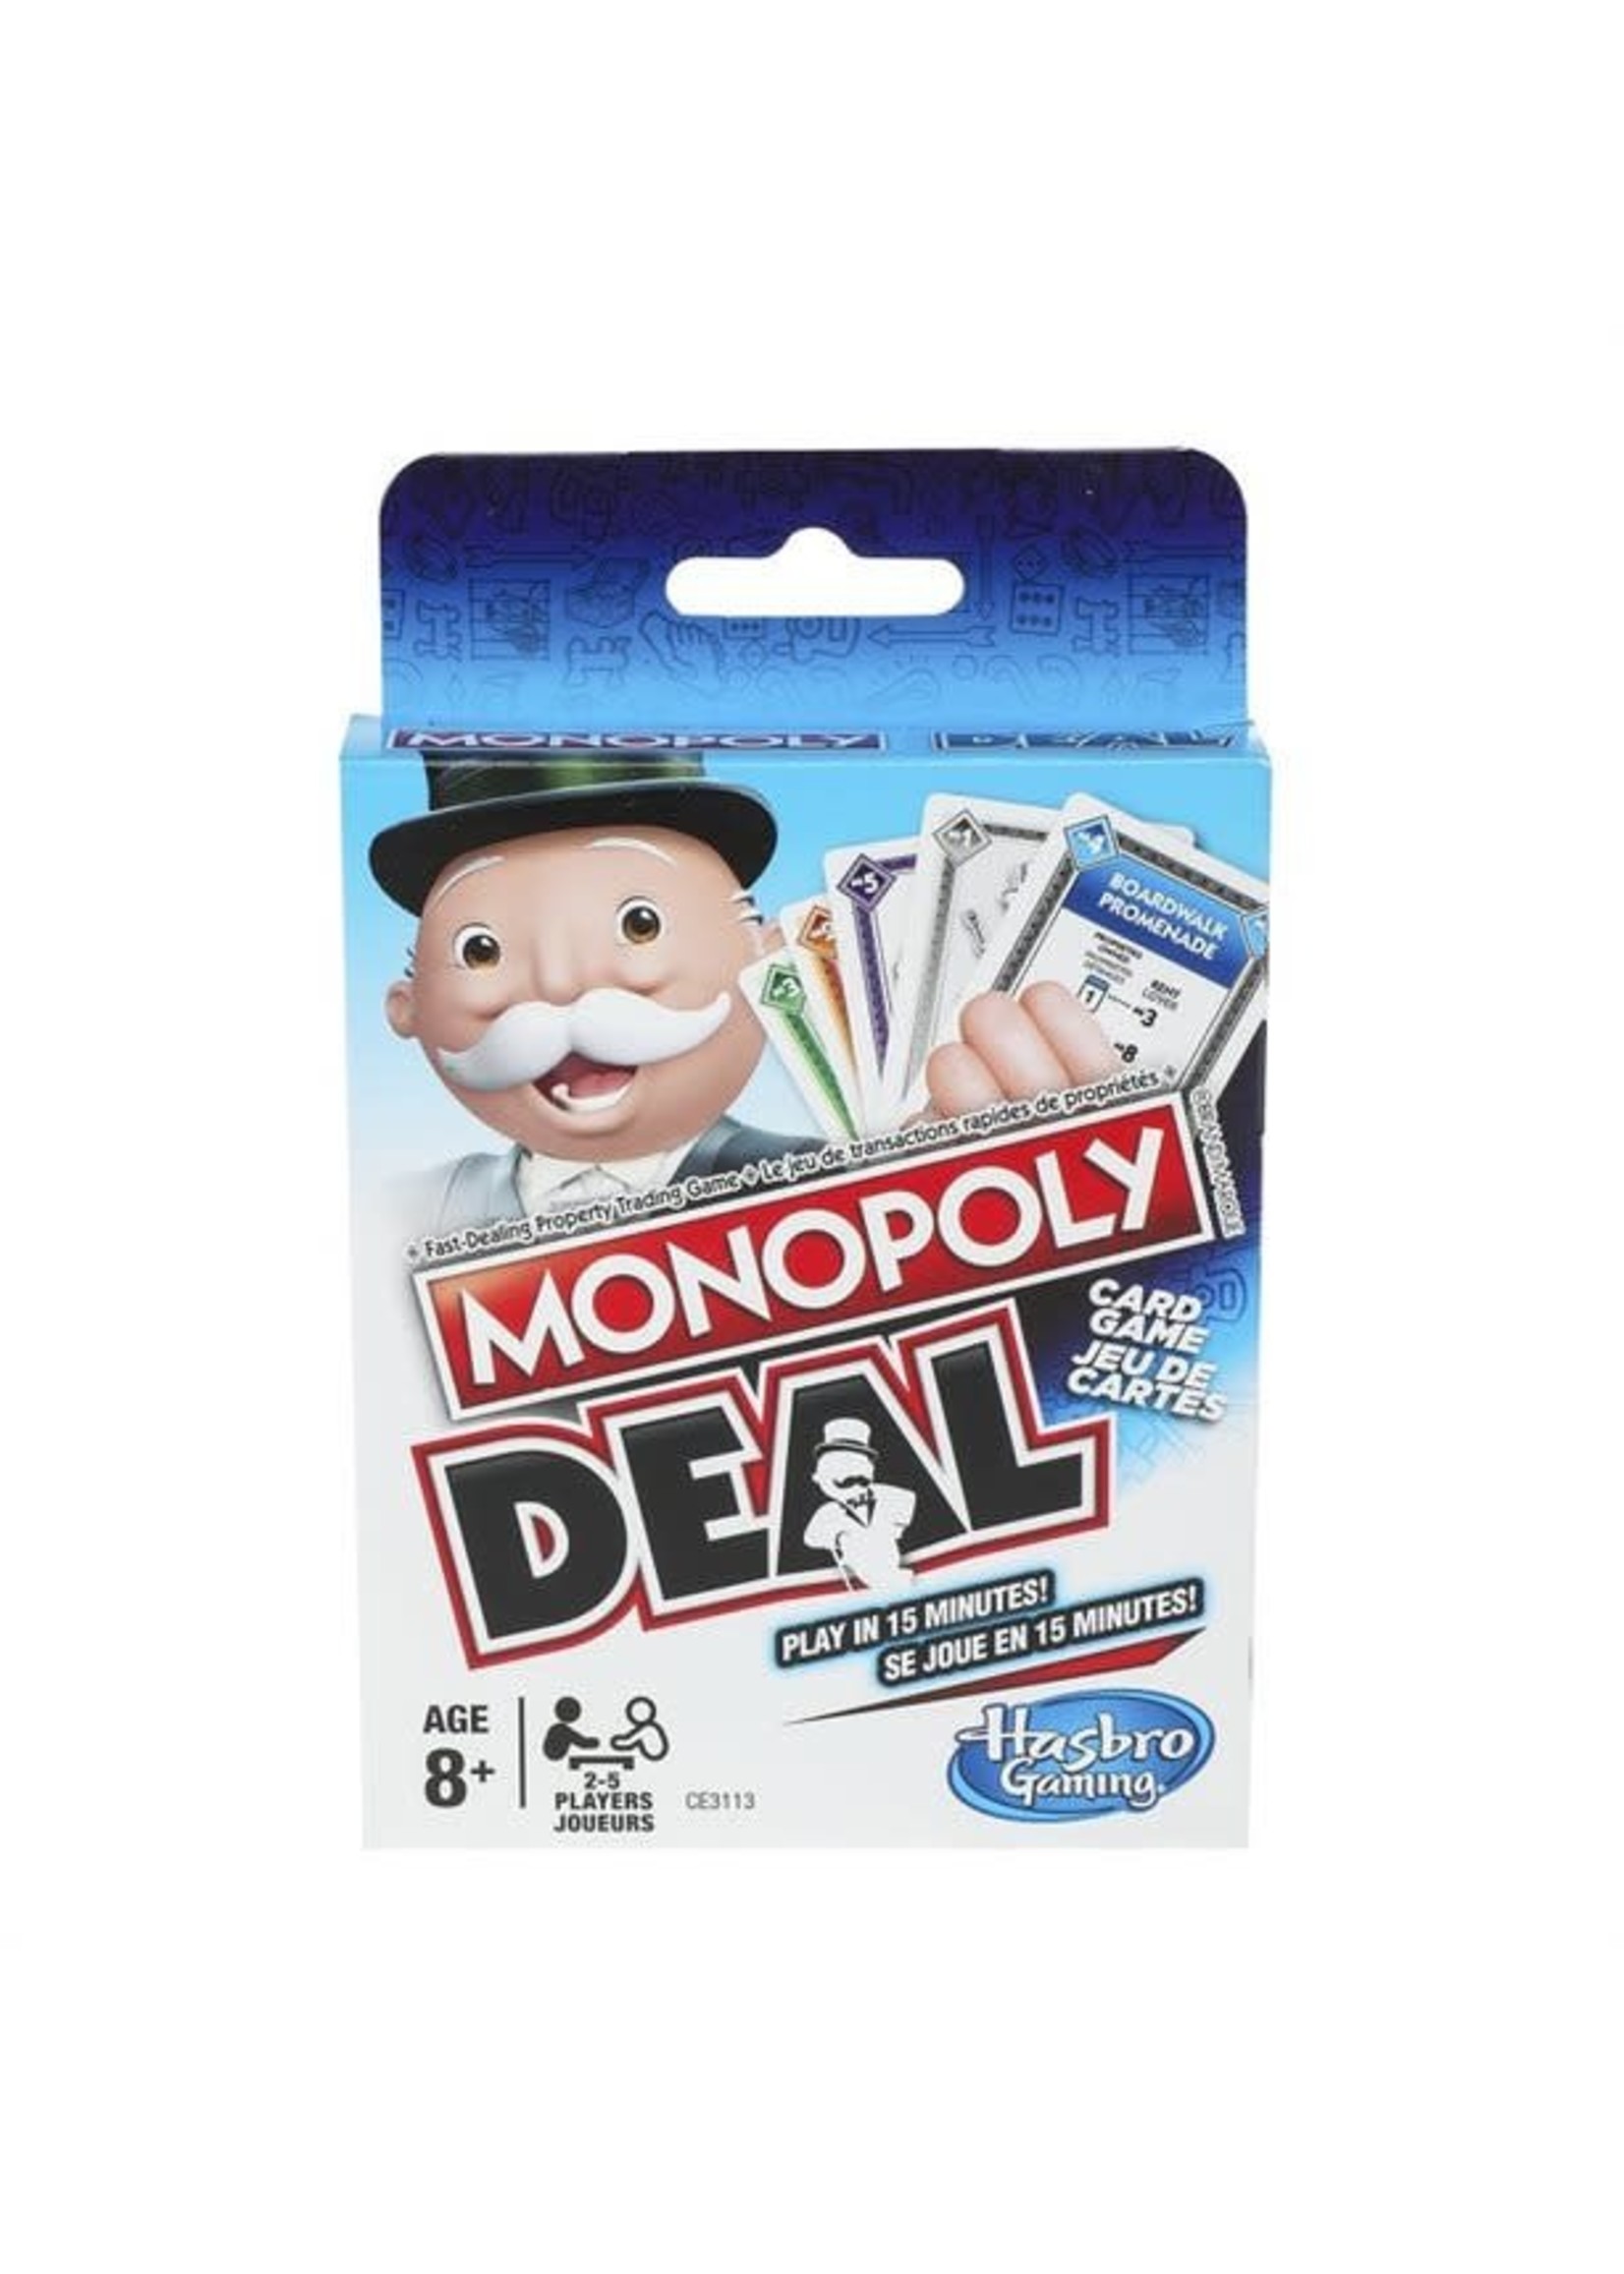 Mattel games Monopoly deal - The card game